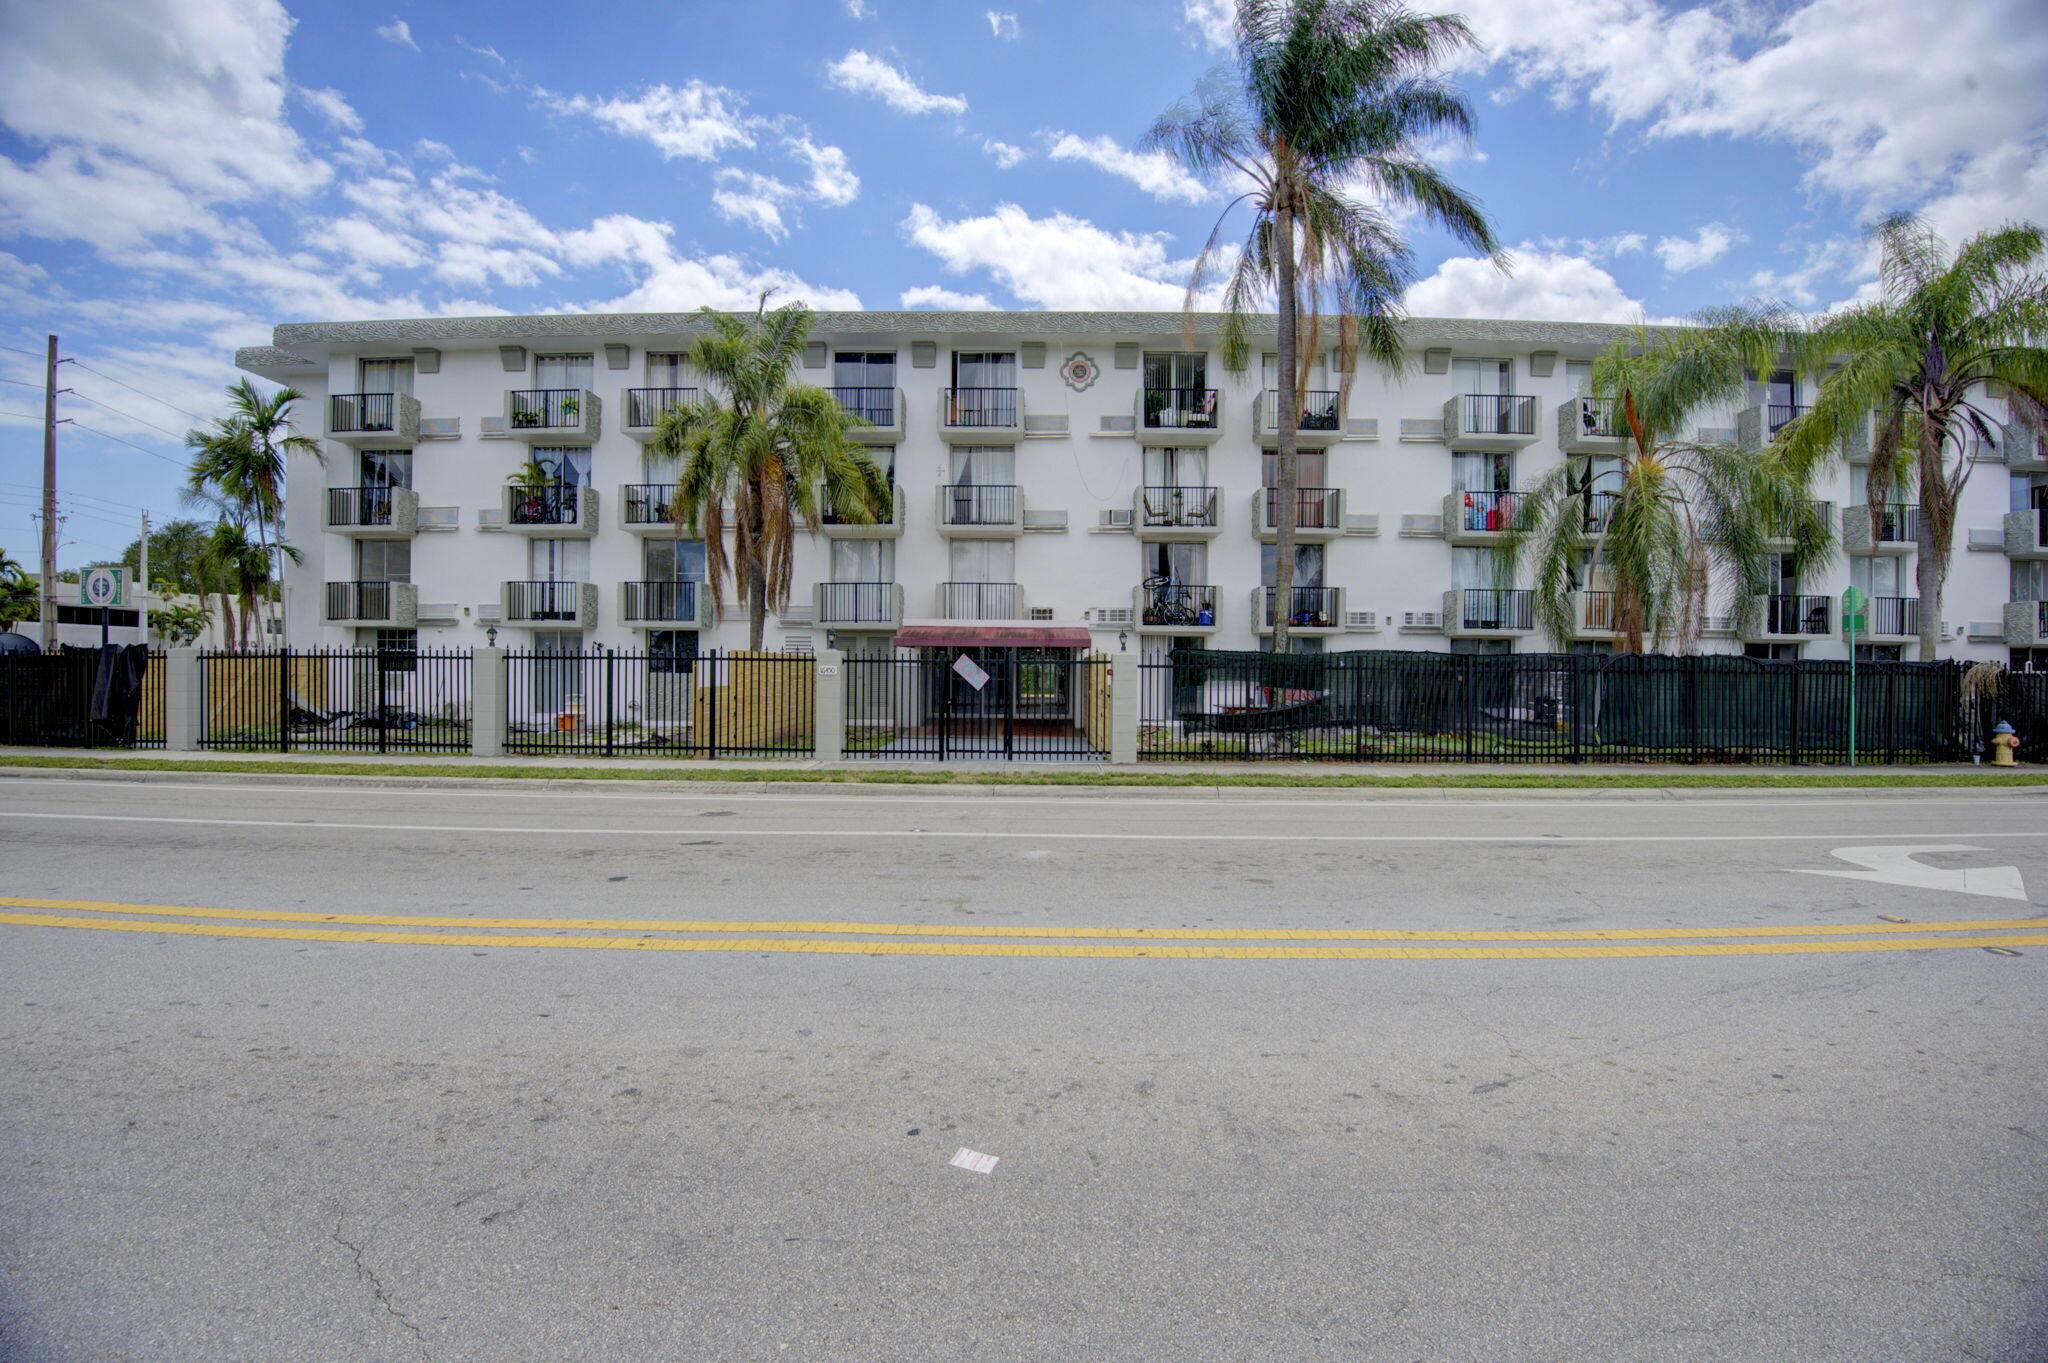 Prime investment opportunity in the prestigious gated Golden Gate Condo community of North Miami with swimming pool on site, a great location awaits you.